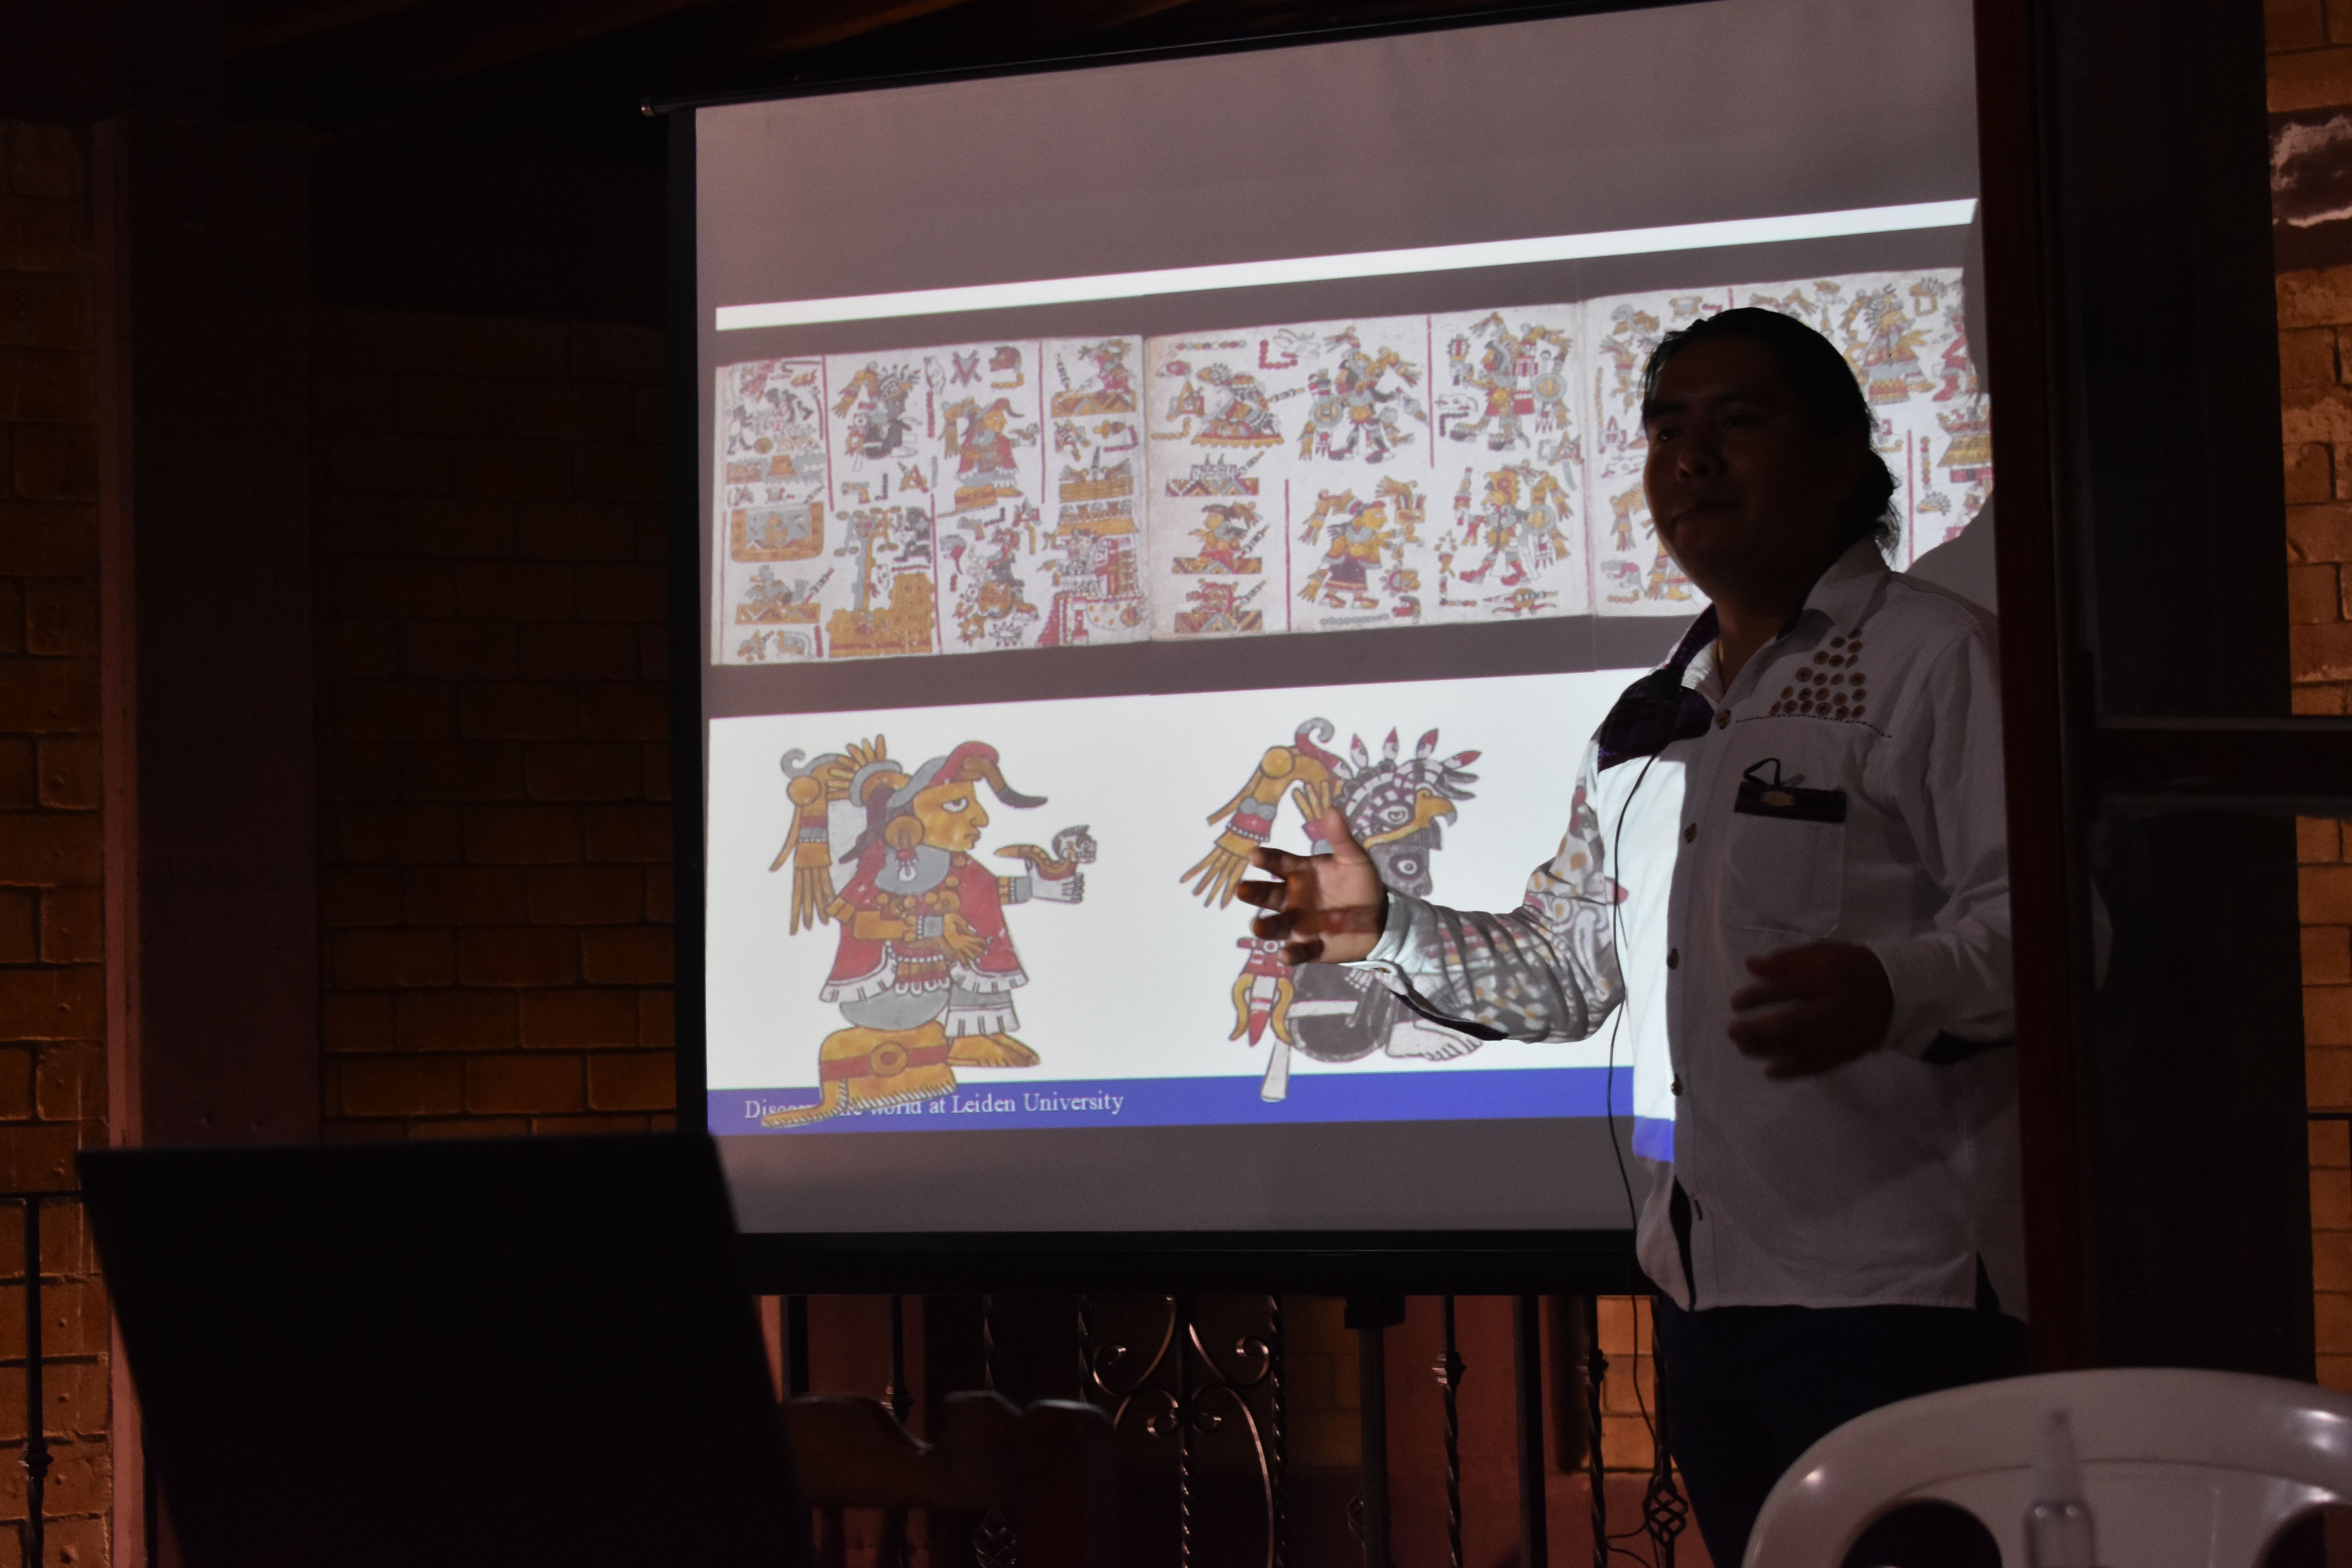 Aguilar presents, standing in front of a codex image projected on a screen